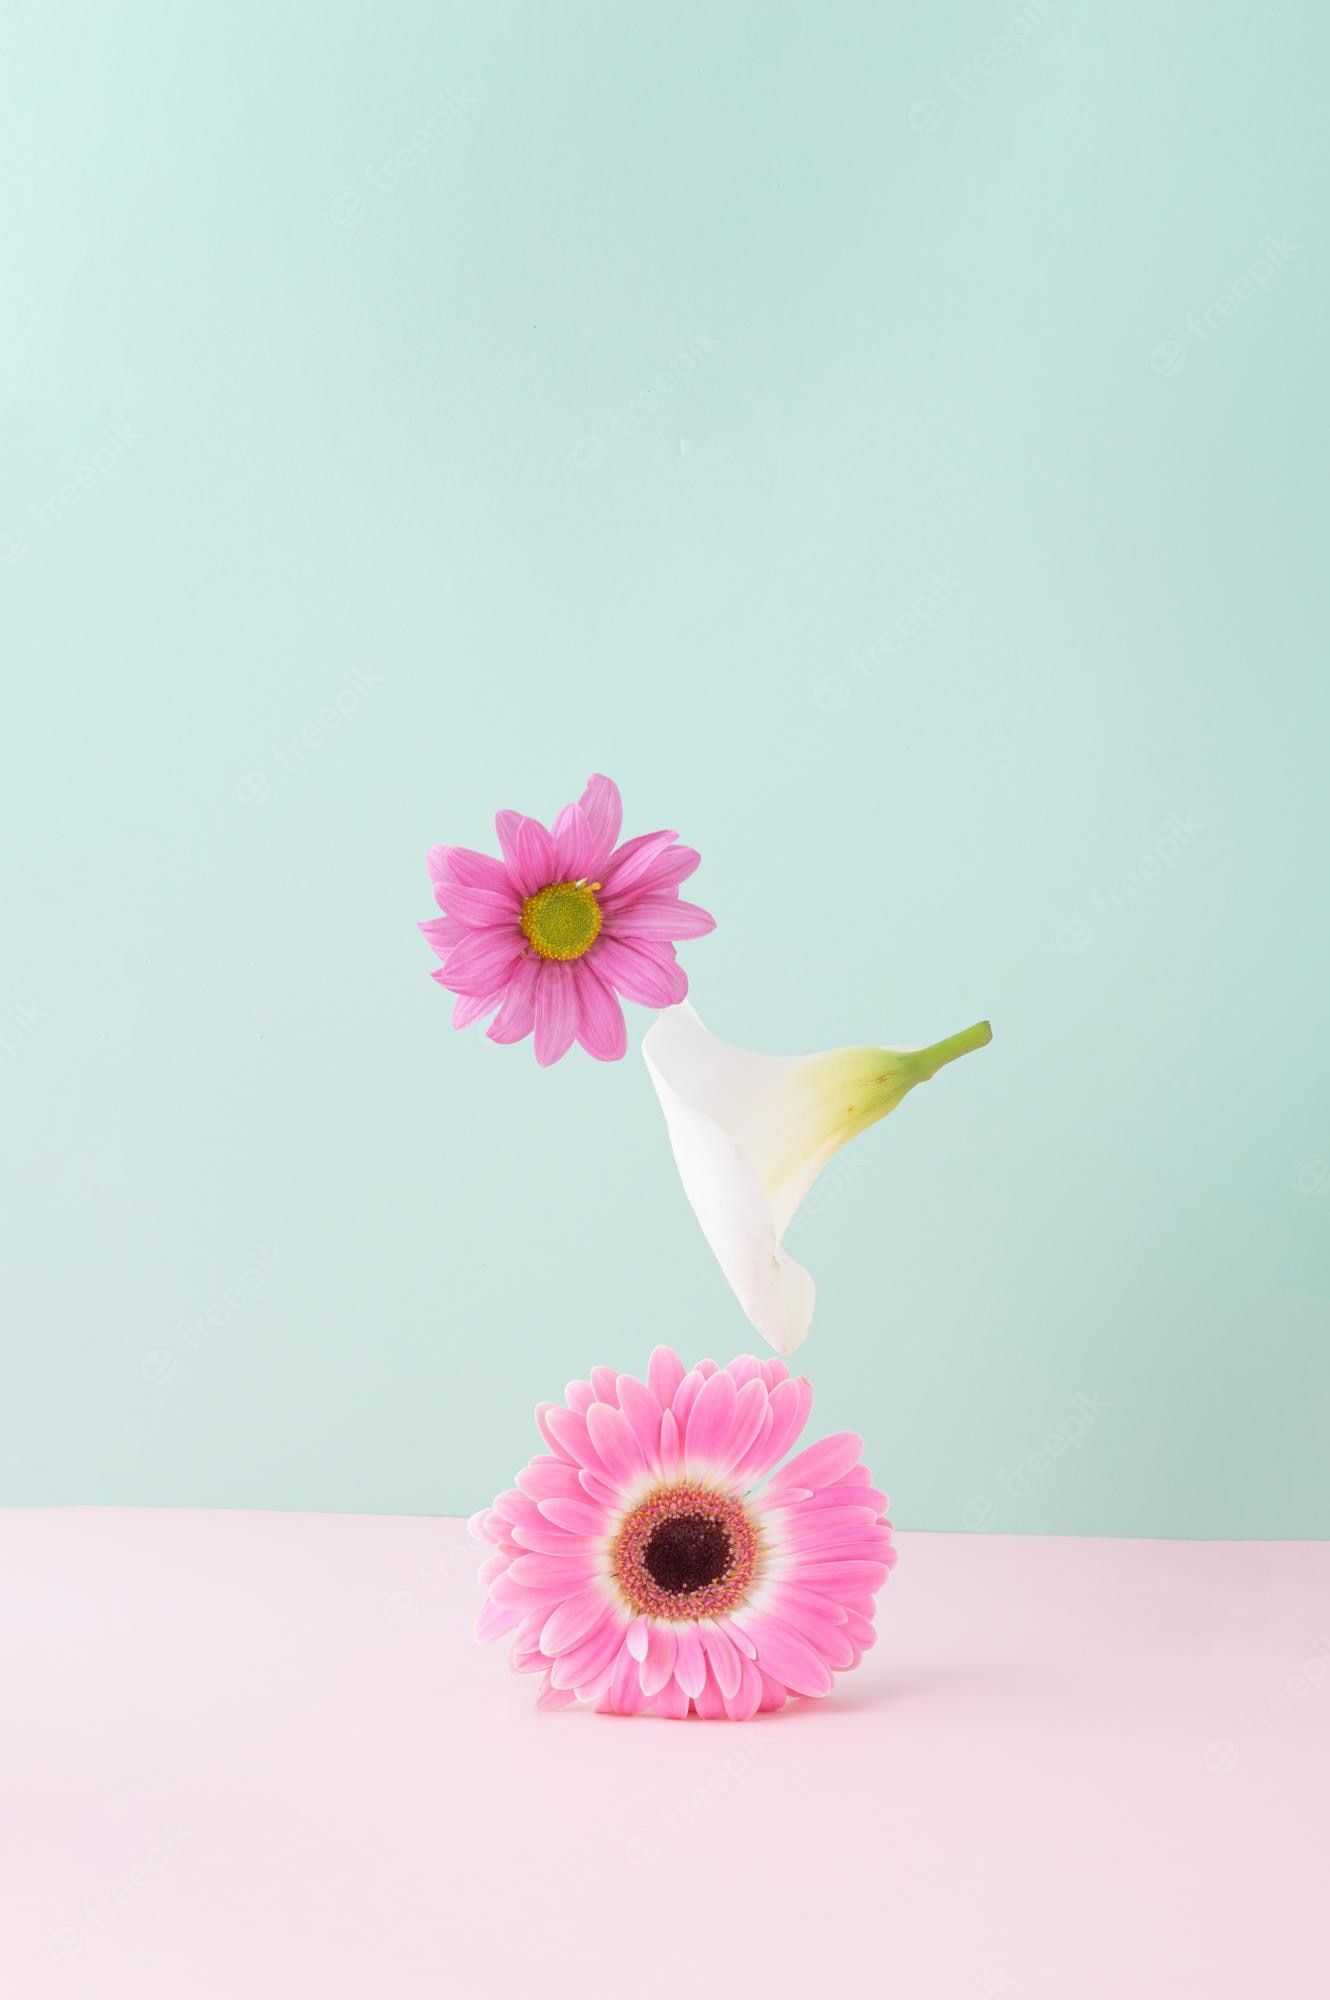 A pink flower leans on a white flower on a pink table with a blue background. - Balance